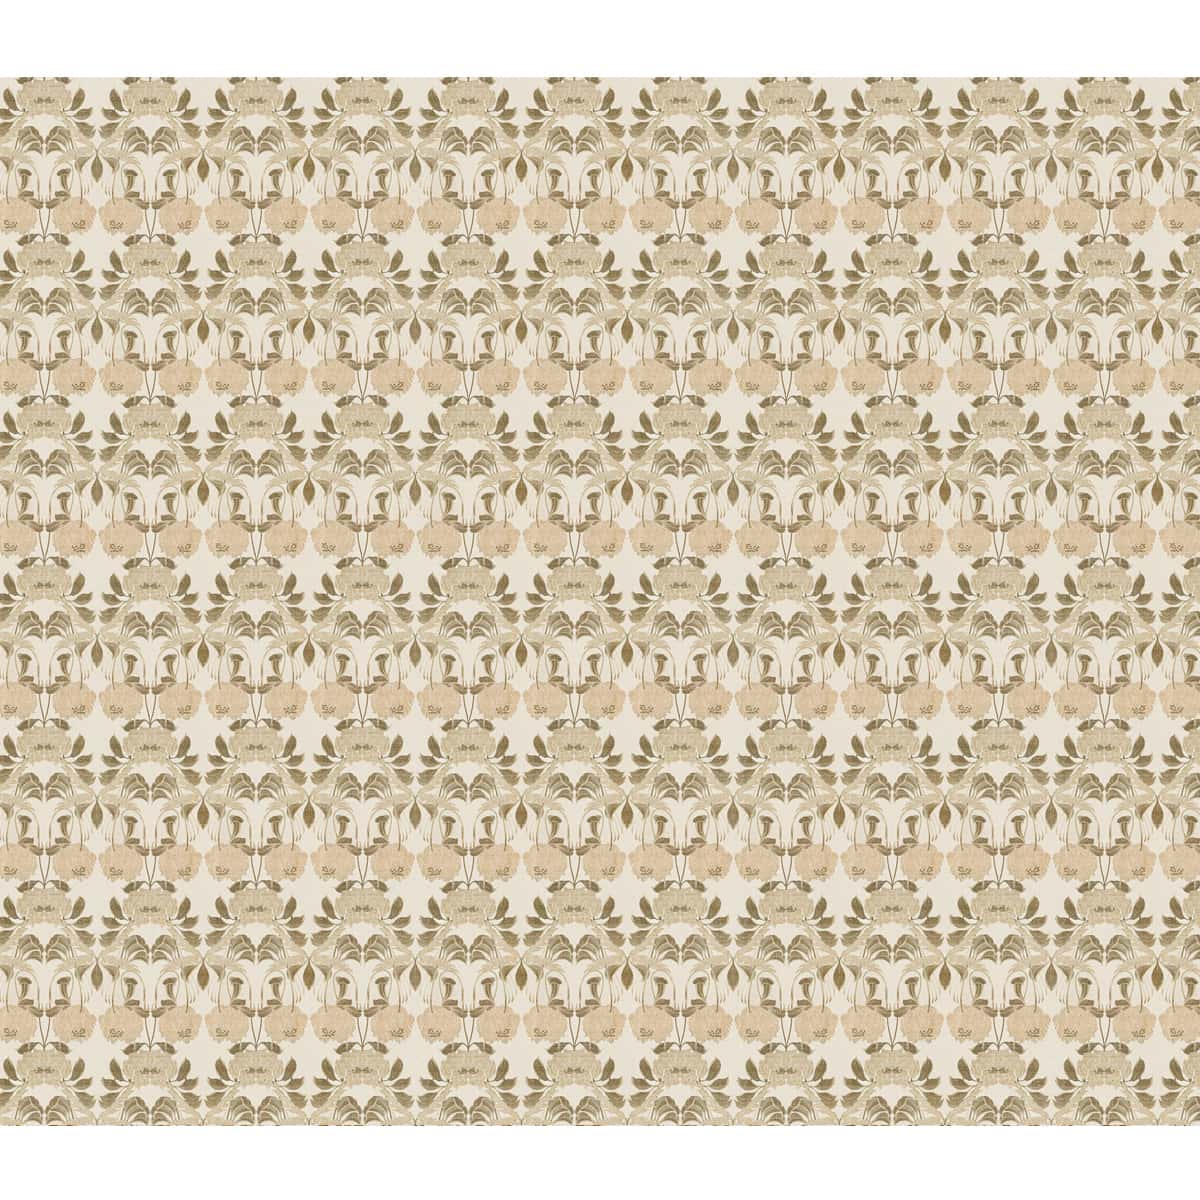 Seamless Beige Damask Repeat Pattern, Wallpaper for Bedrooms